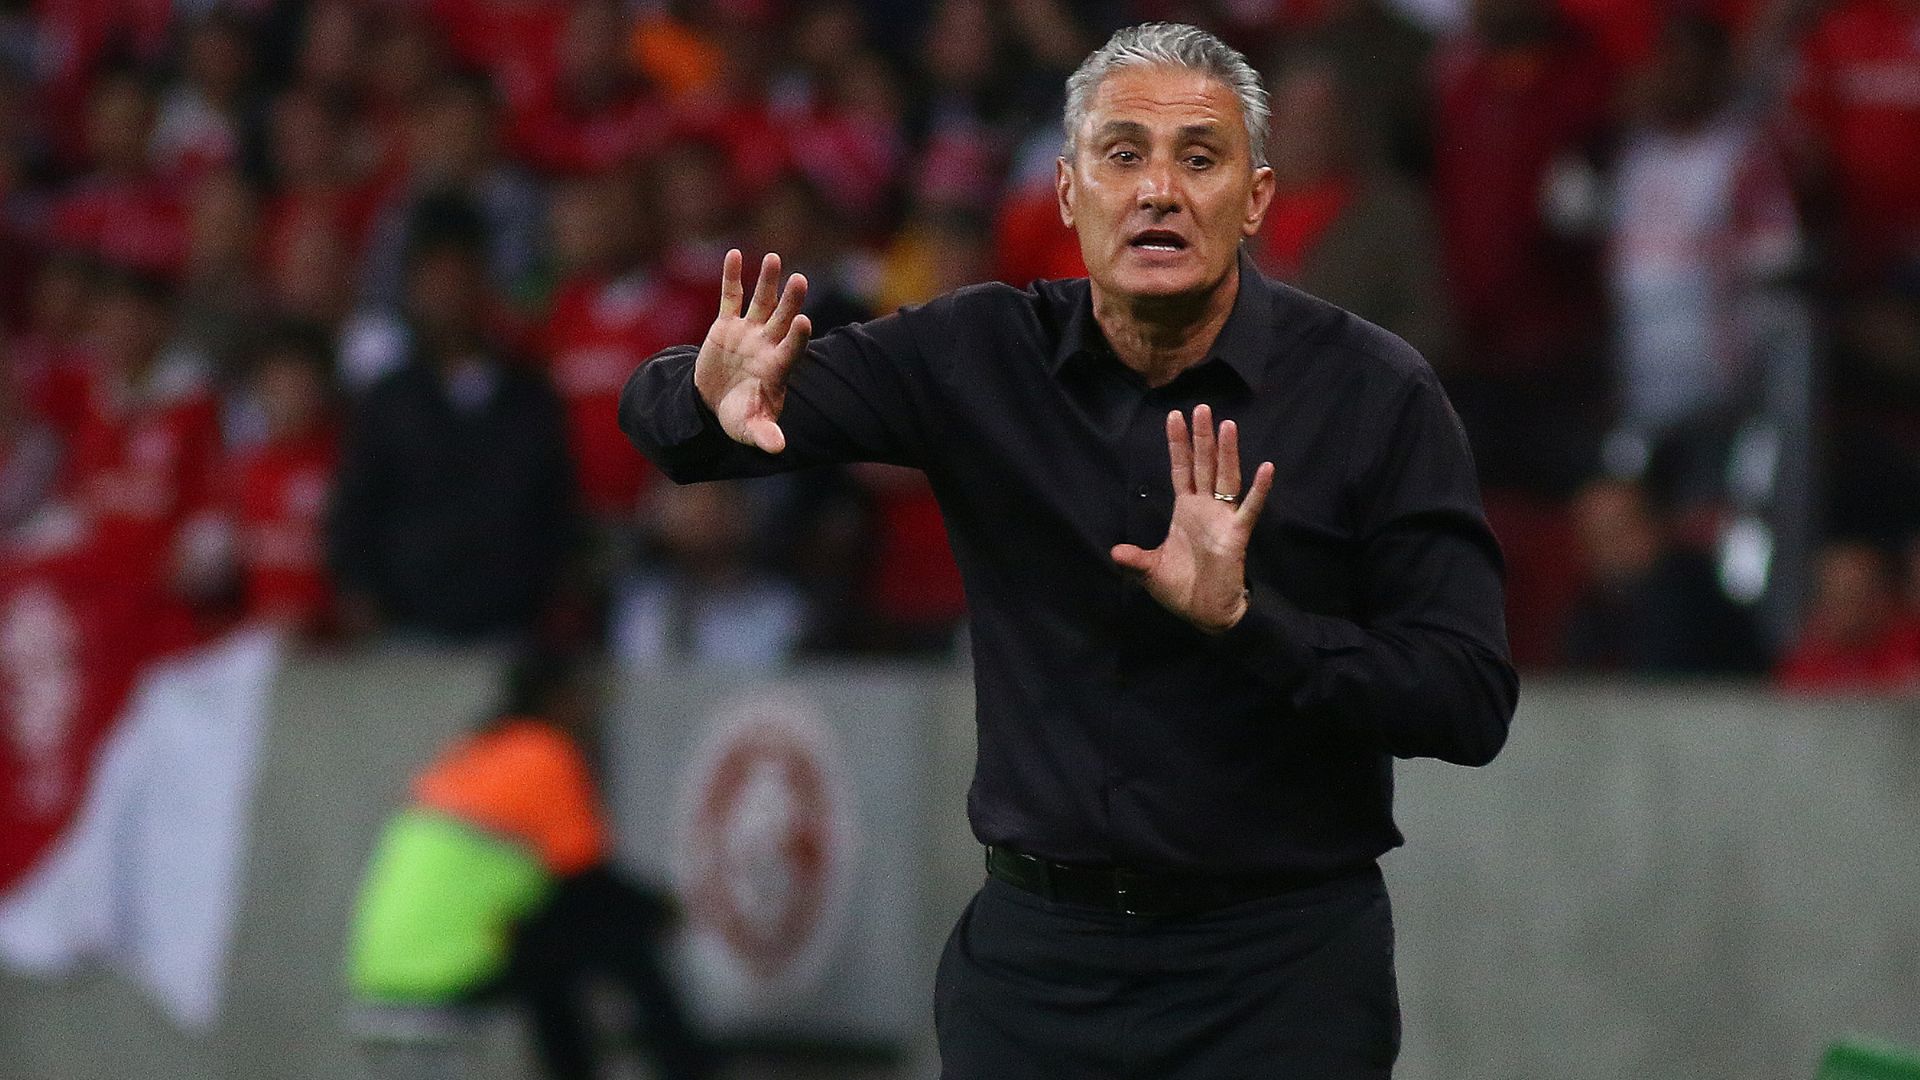 Tite, at the time he coached Corinthians